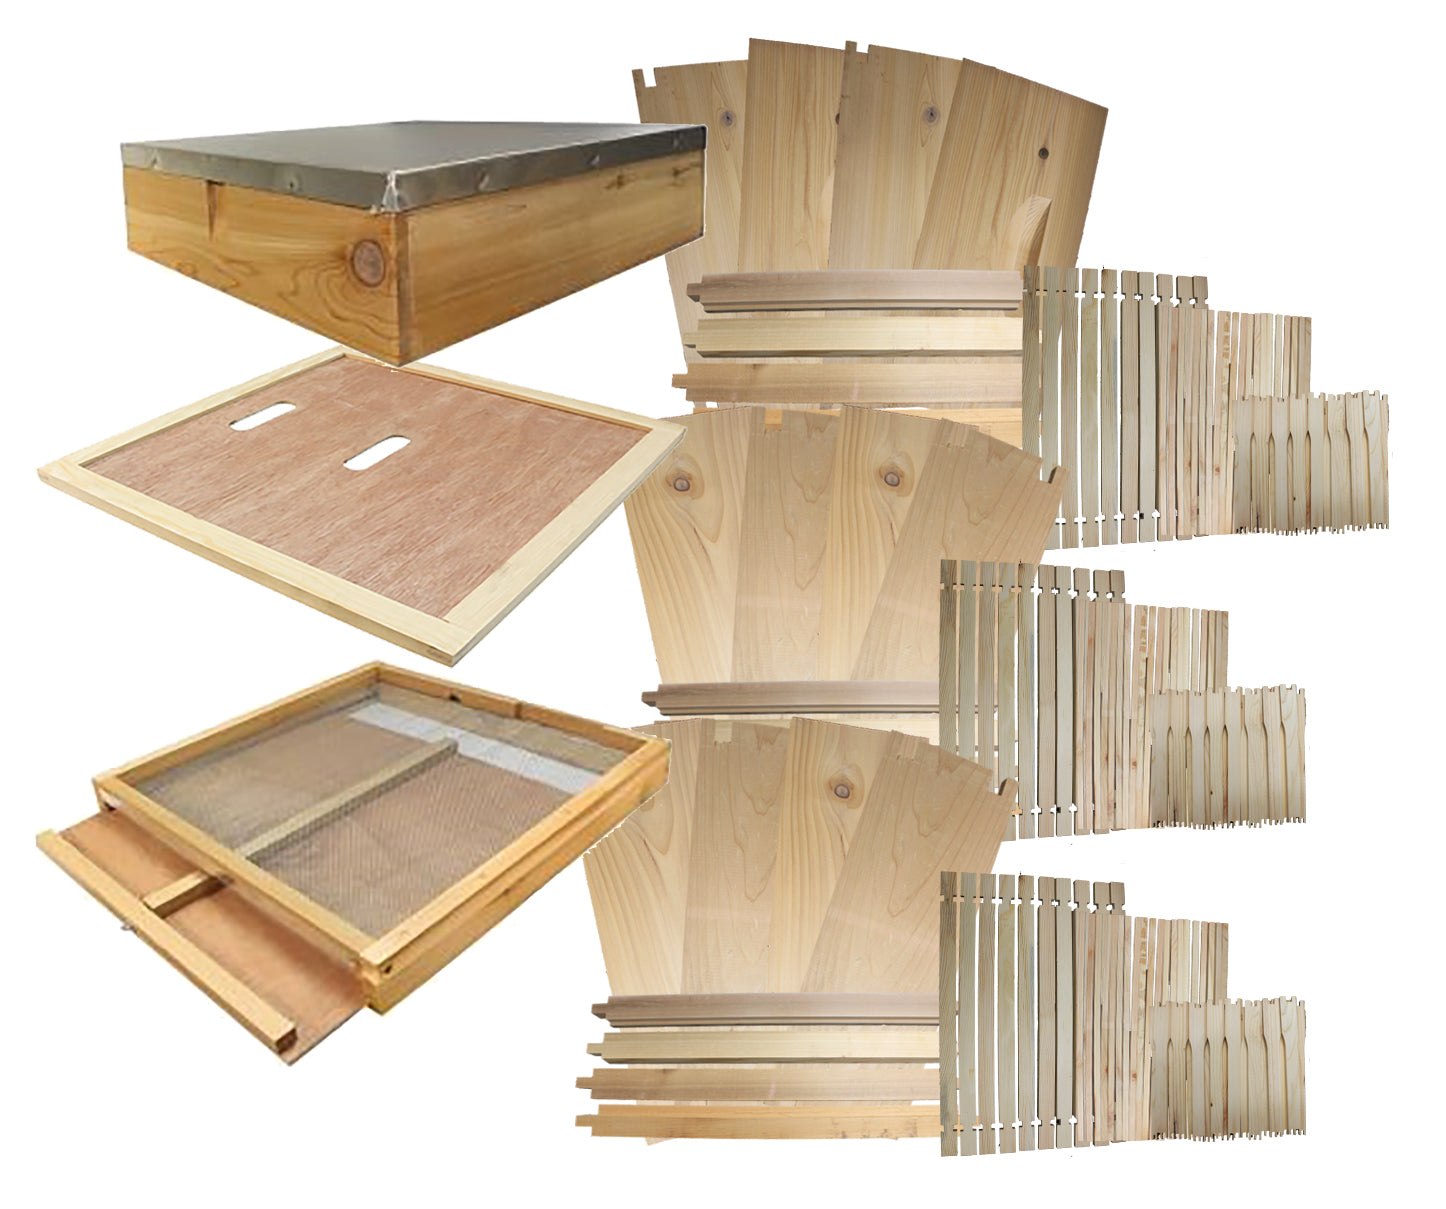 B.S. National Complete Hive Kit, Flat, Cedar, With Wax Foundation - Bee Equipment